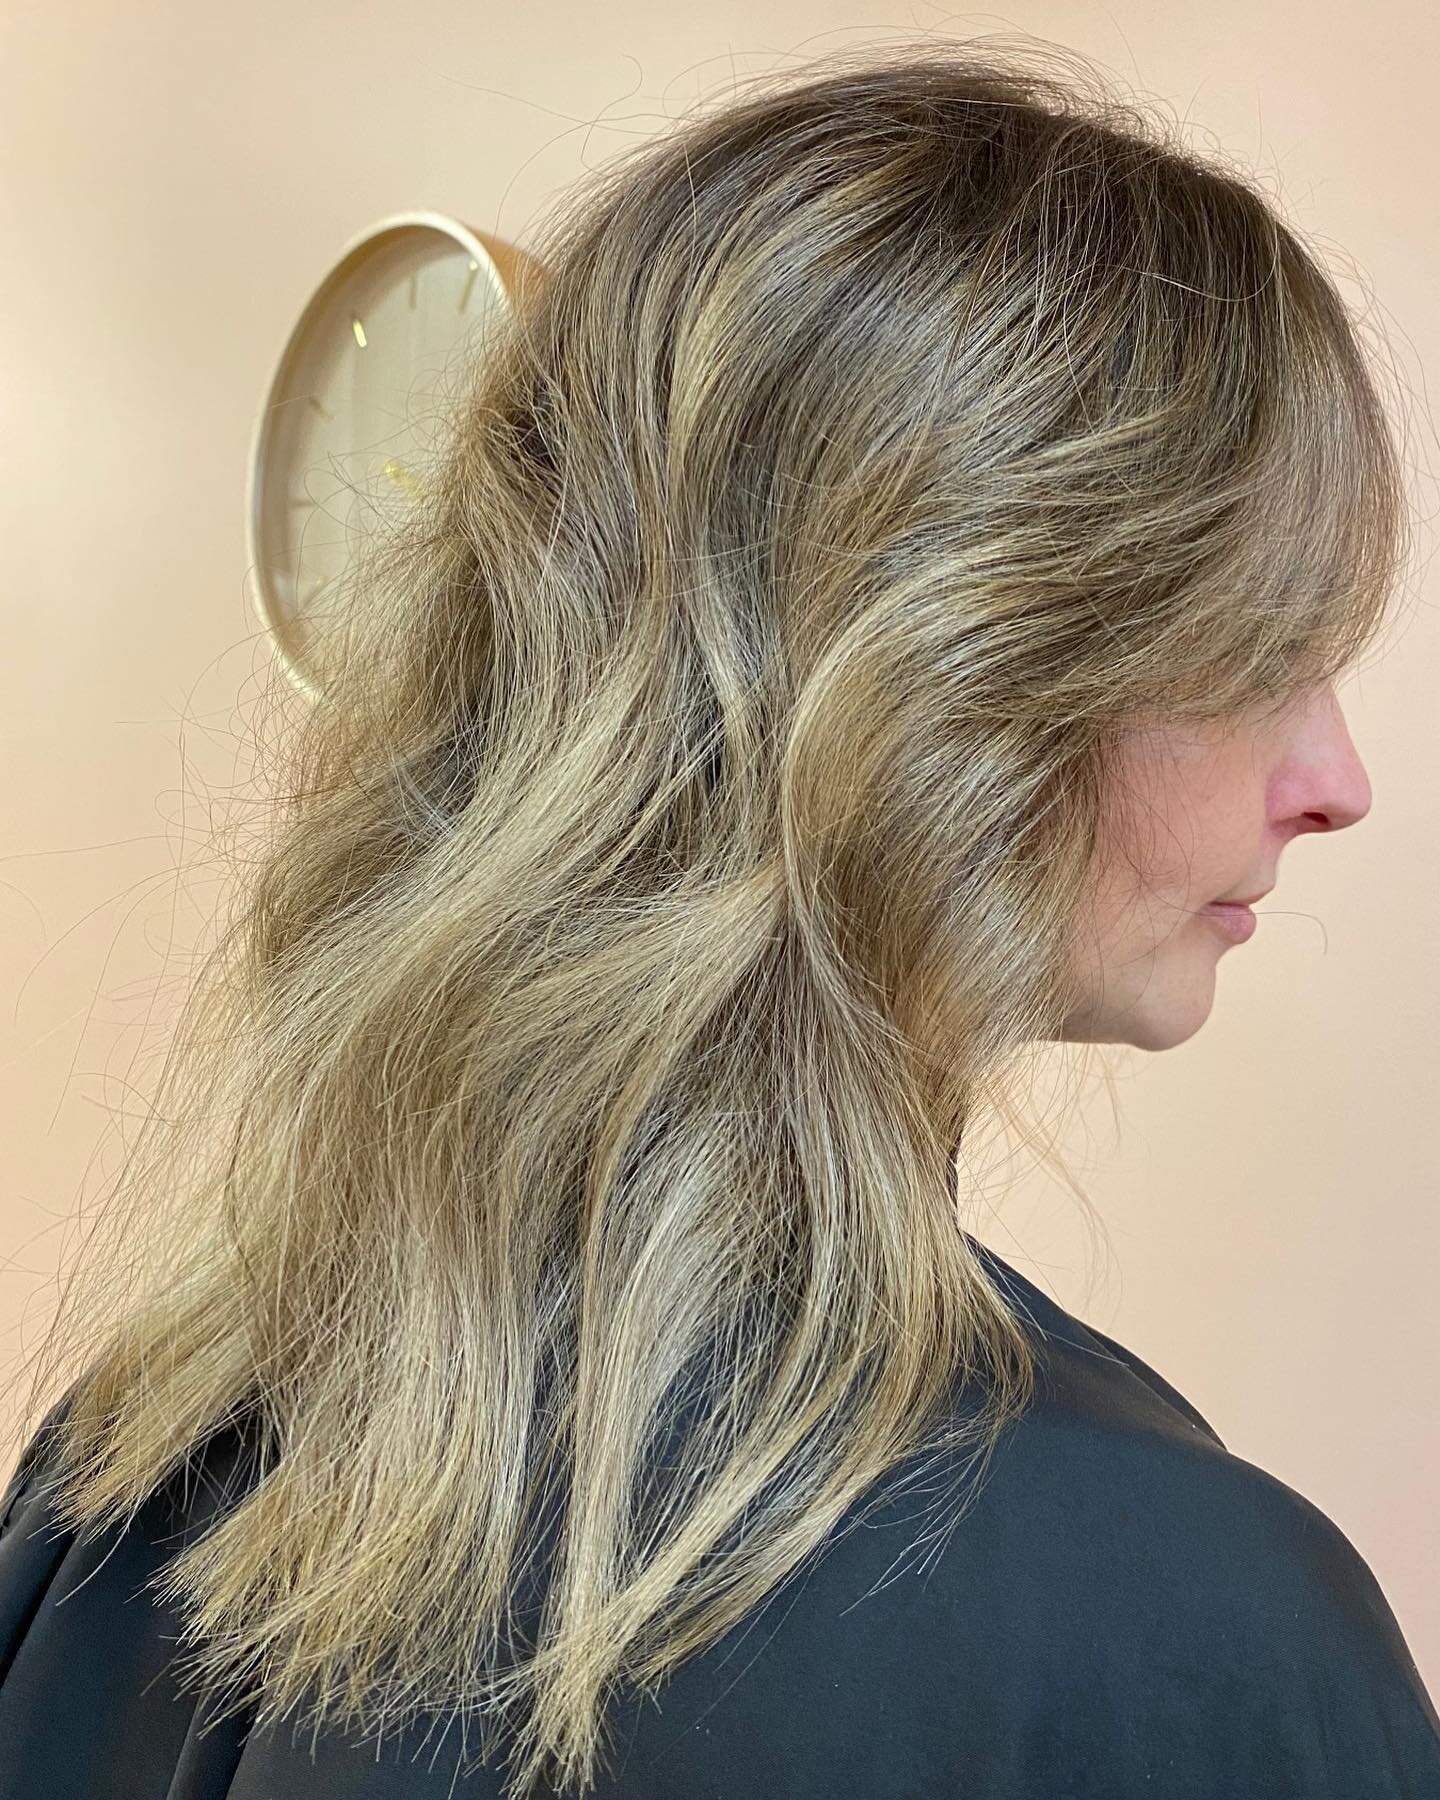 Day 1 in lockdown - currently looking through photos of hair on my camera roll, counting down until we can get creative again. 

How about you?

#hair #thejournalmag #hairstylist #hairgoals #hairdresser #rootsmudge #longhair #blondespecialist #blonde